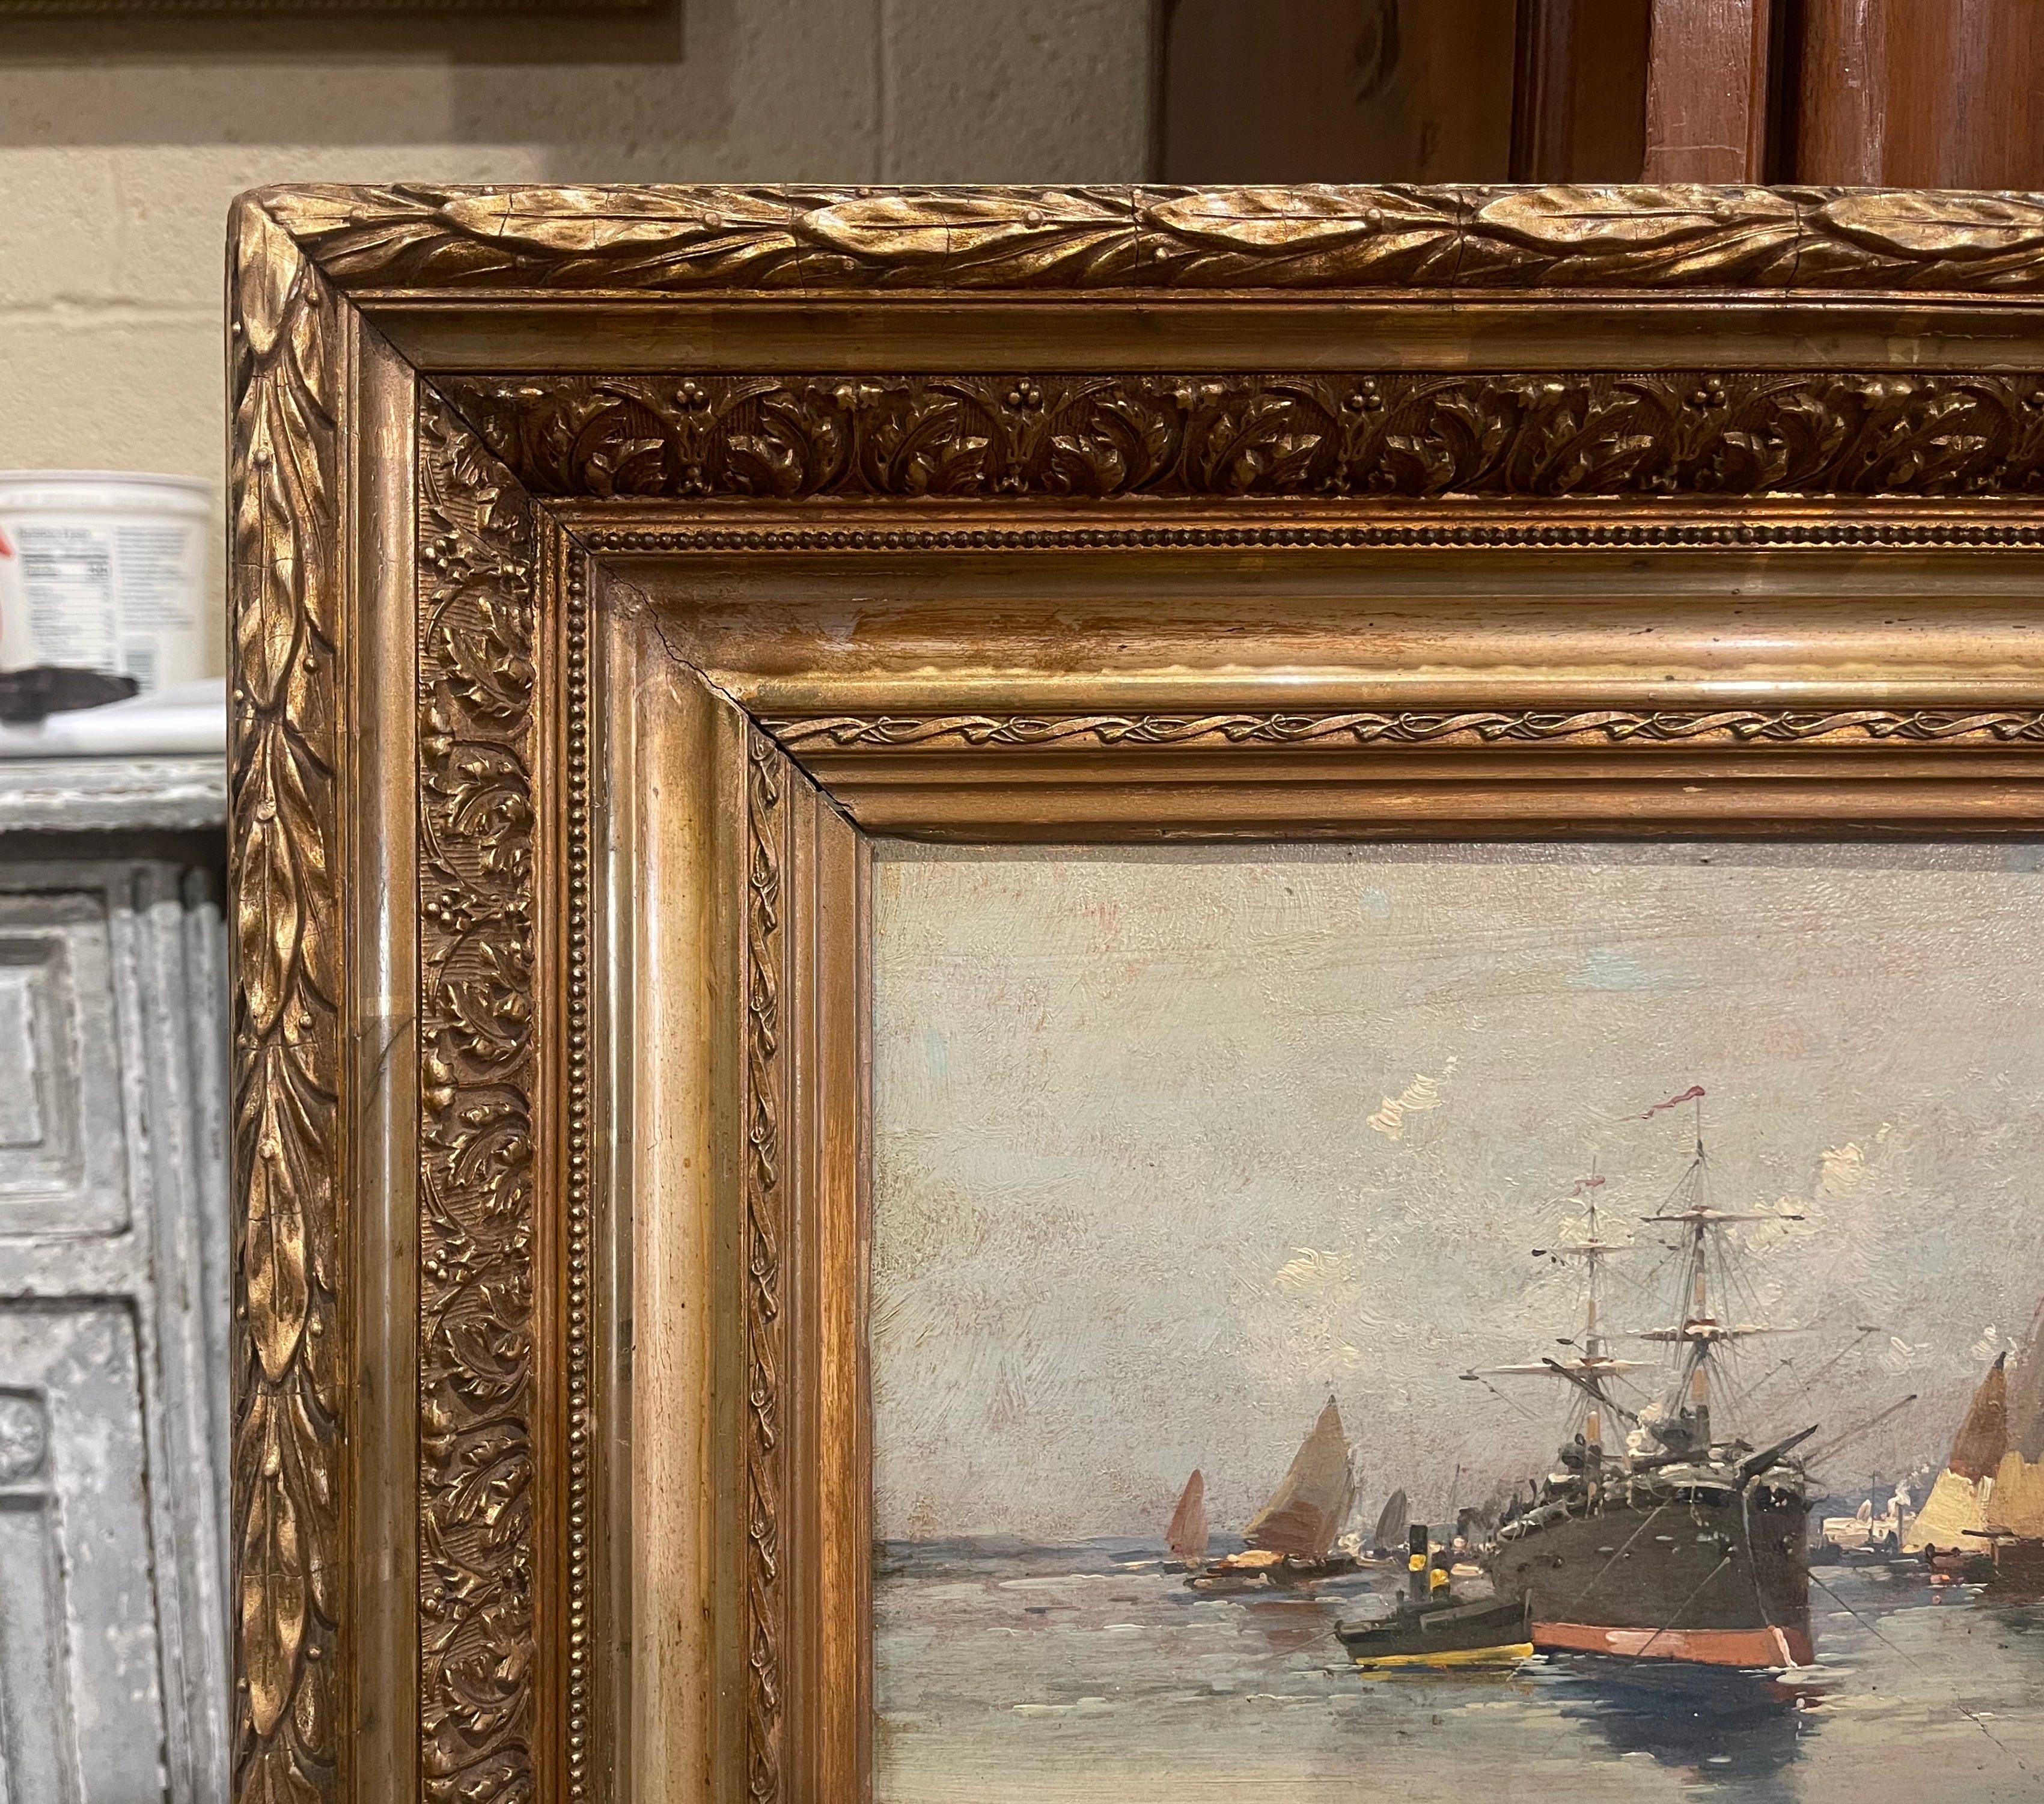 Canvas 19th Century Oil Ship Painting in Gilt Frame Signed Dupuy for E. Galien-Laloue